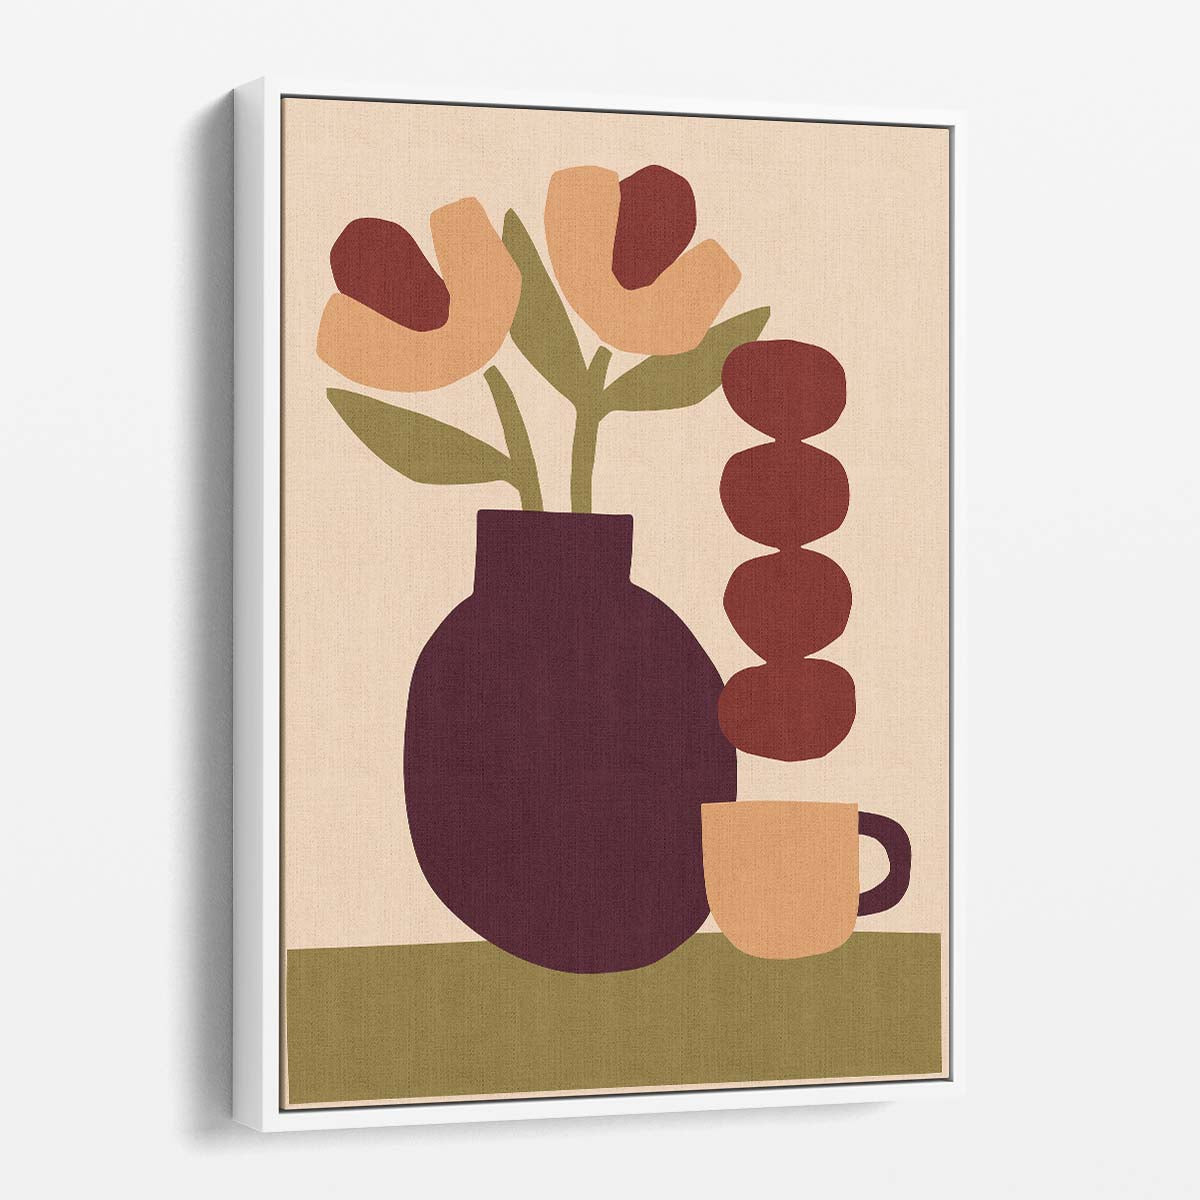 Floral Abstraction Illustration Purple Flowers in Vase, by Margaux Fugier by Luxuriance Designs, made in USA